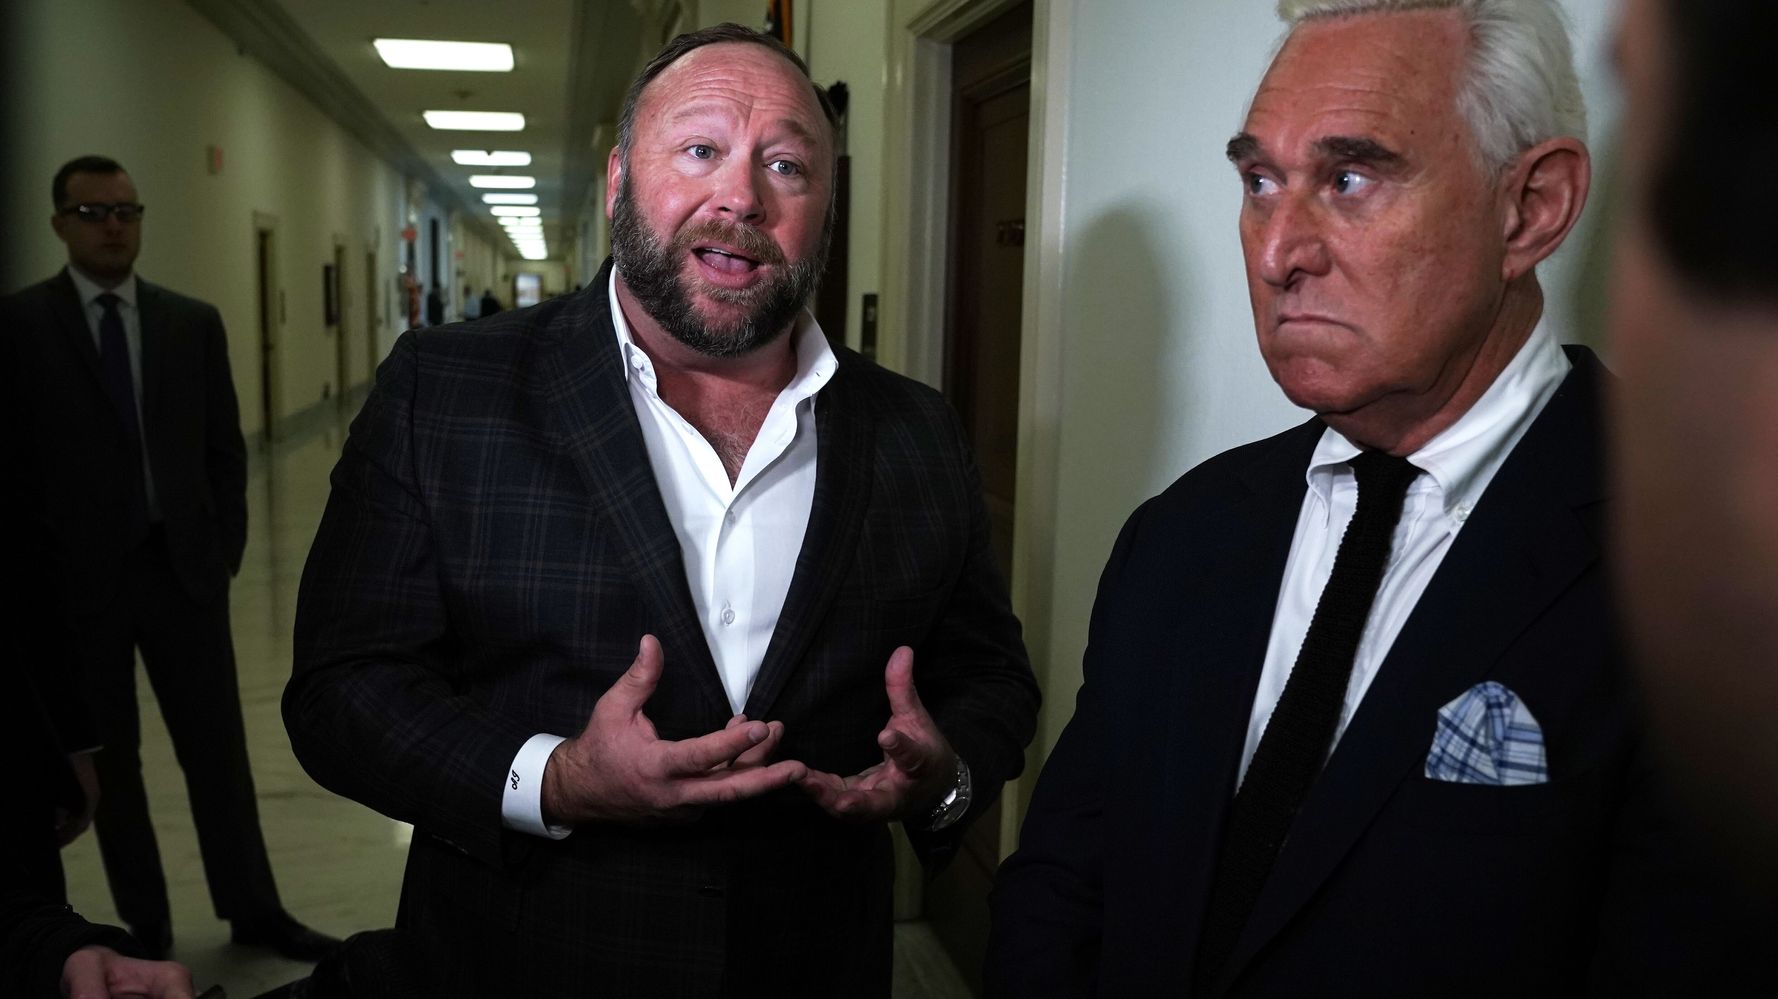 Alex Jones Sent 'Intimate Photo' Of His Wife To Roger Stone, Lawyer Says